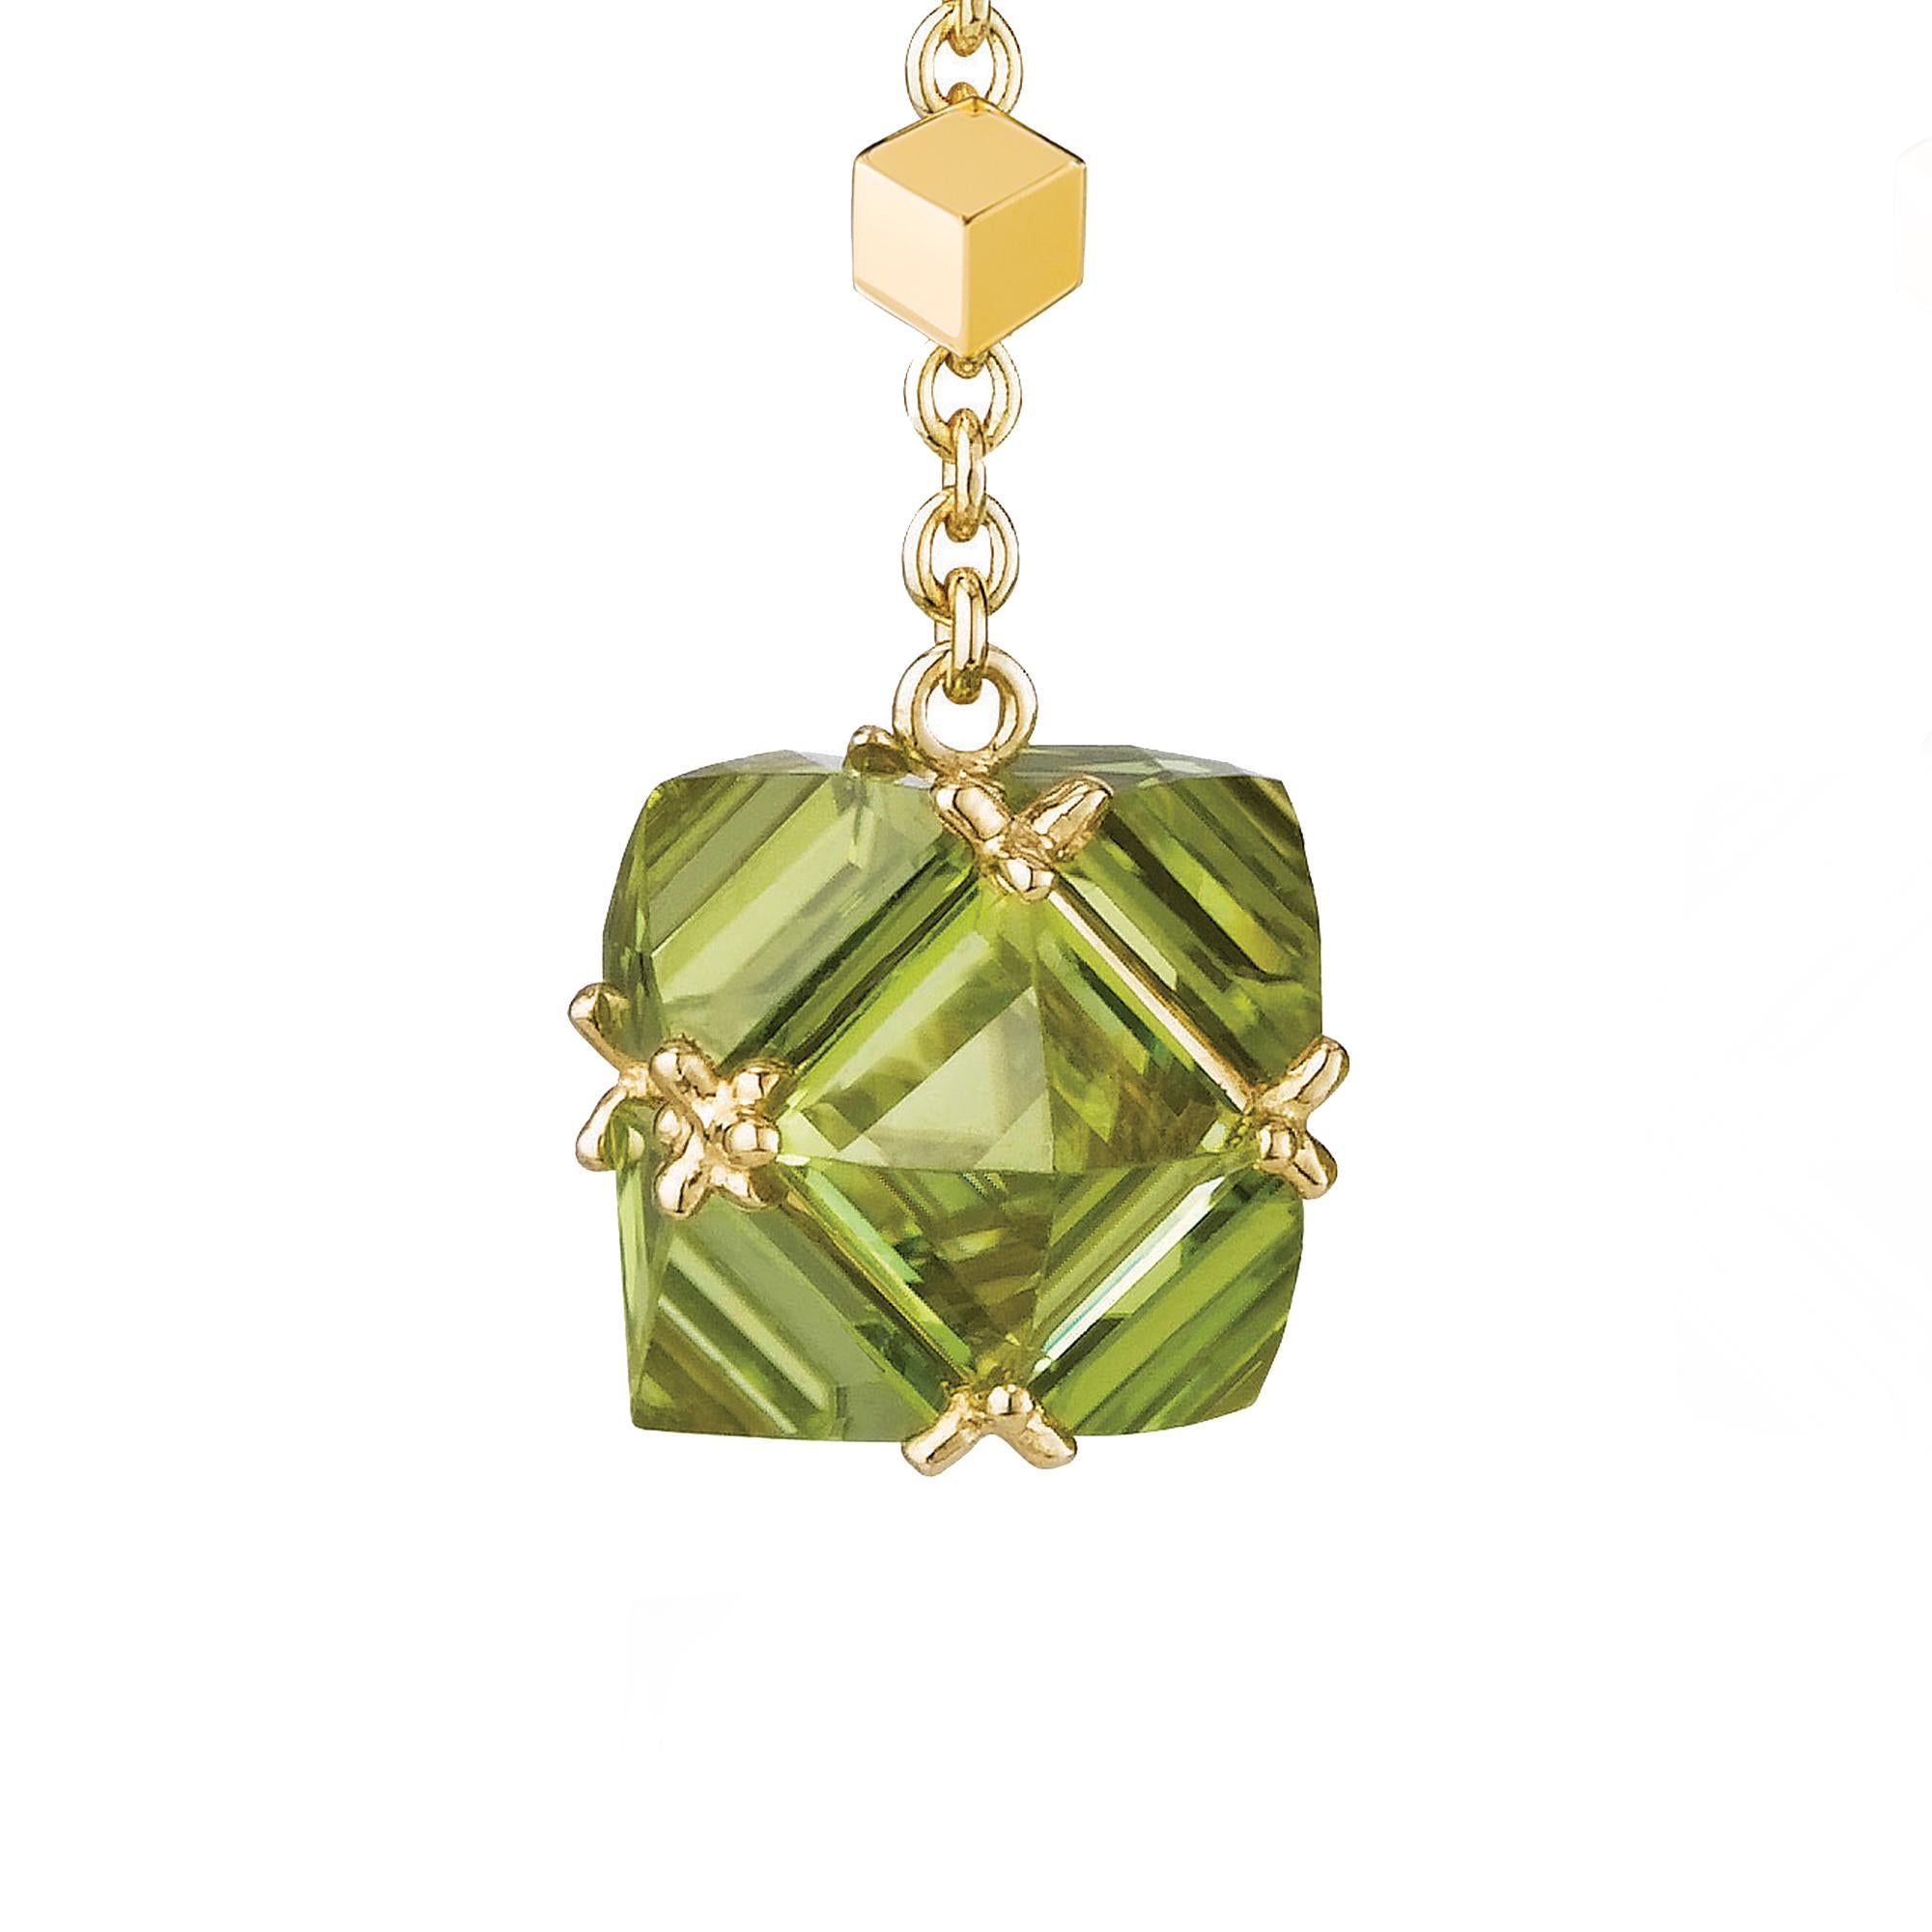 18kt yellow gold Very PC® earrings with reverse set emerald-cut peridots and round pink sapphires, and signature Brillante® motif.

Staying true to Paolo Costagli’s appreciation for modern and clean geometries, the Very PC® collection embodies bold